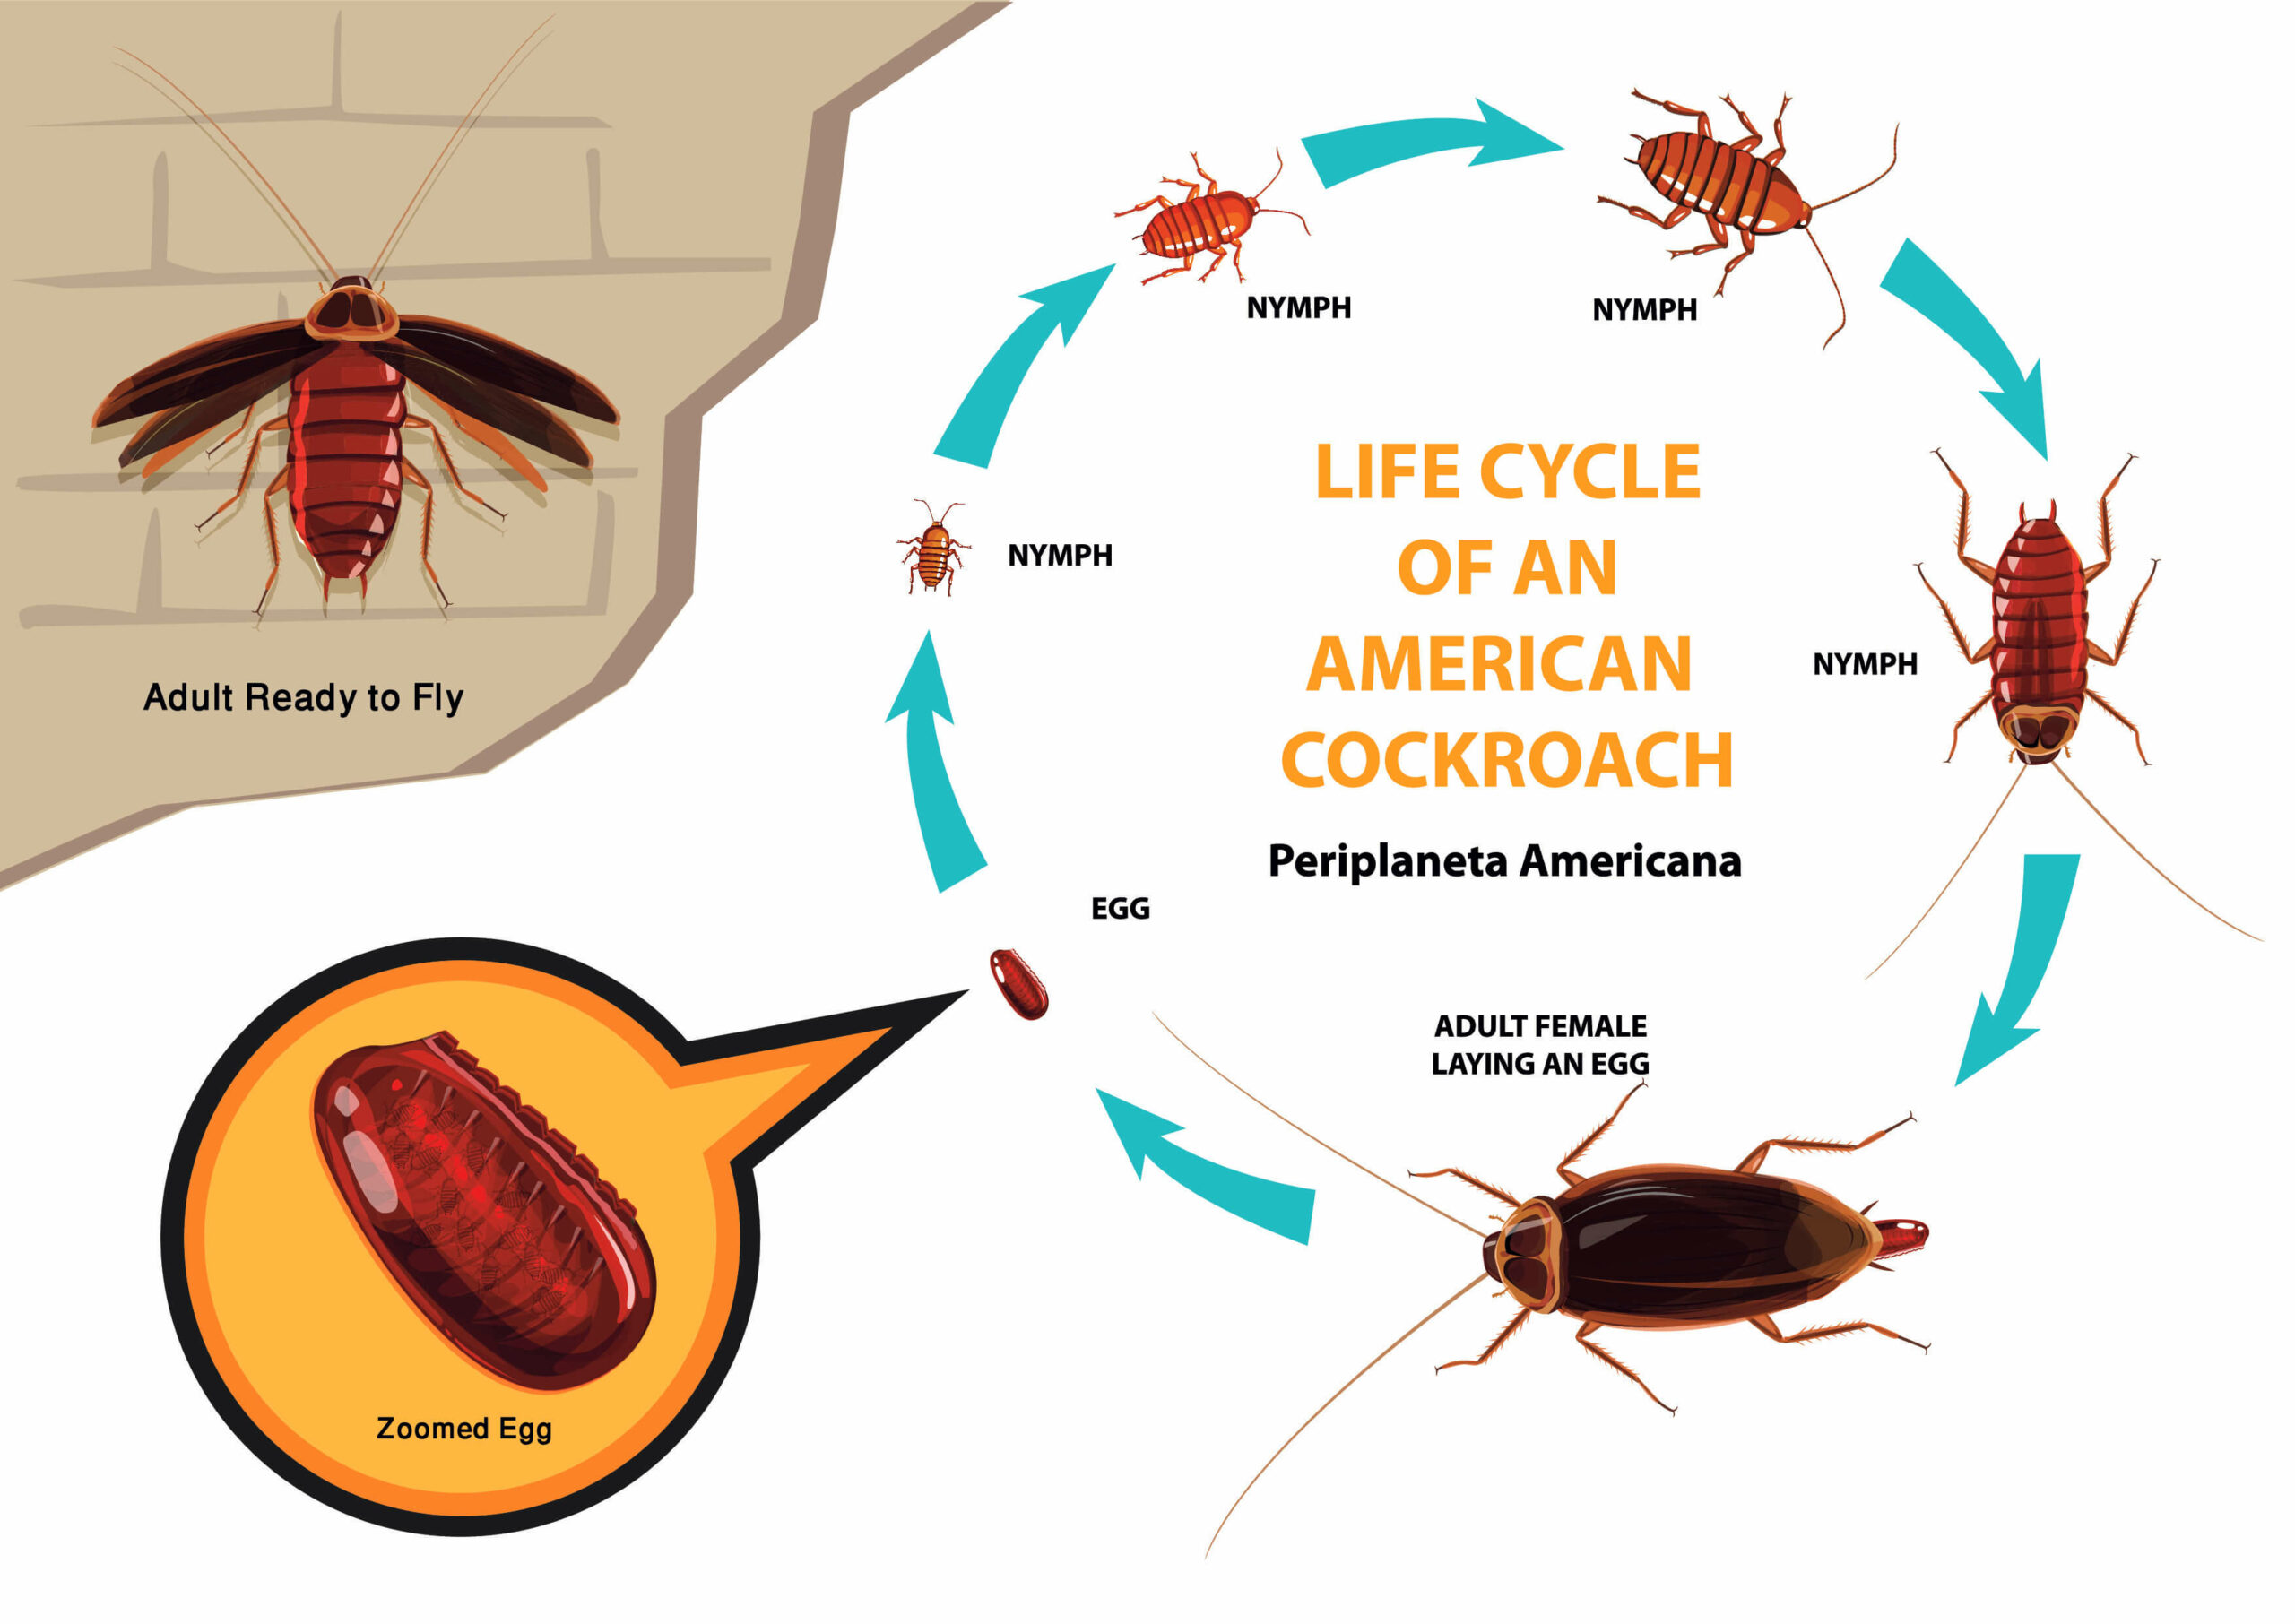 The different stages of the American Cockroach life cycle